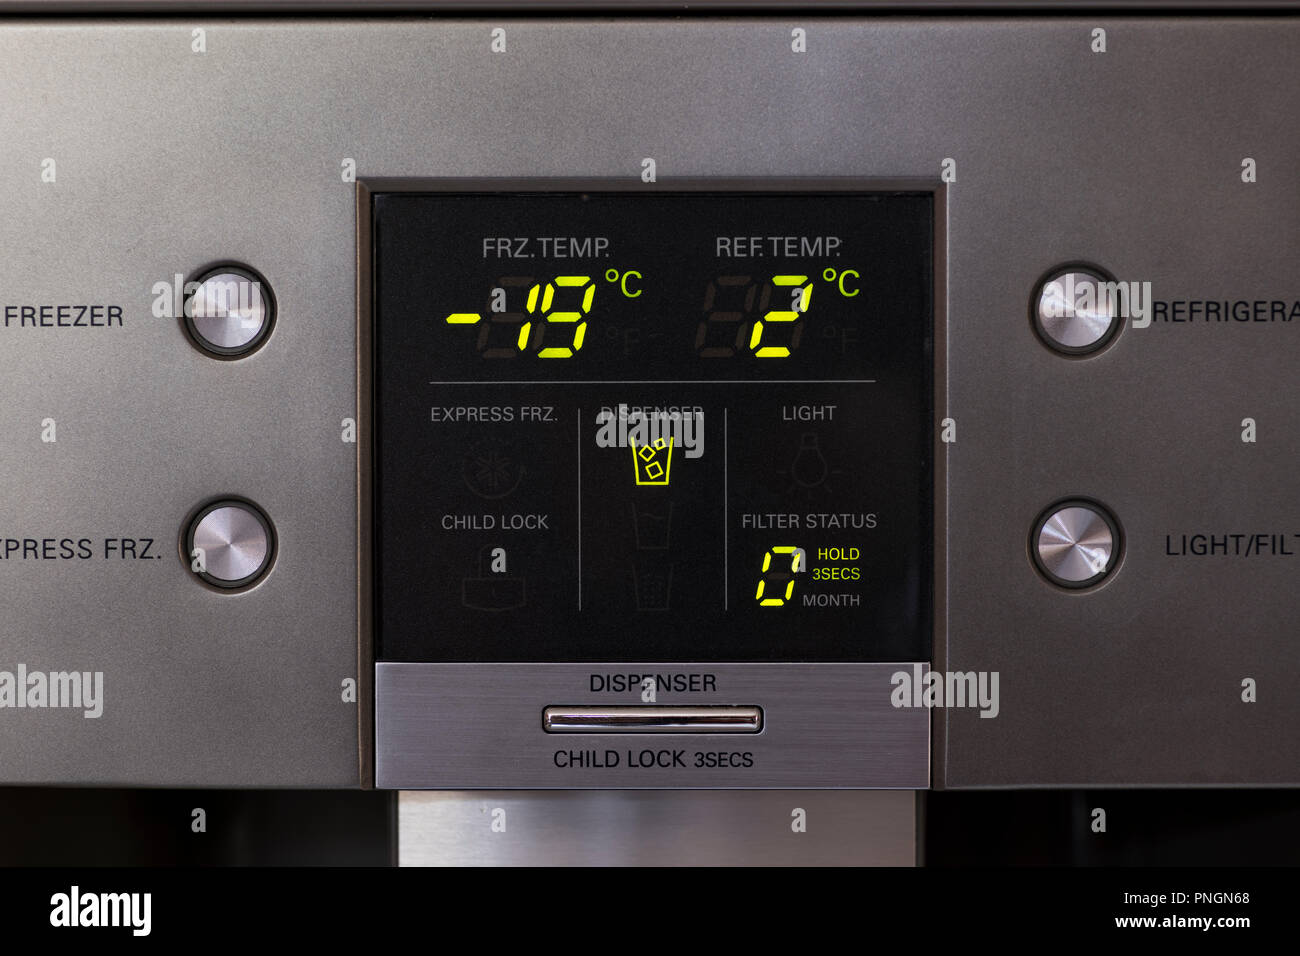 Fridge Digital Control Panel with temperature in degree celsuis of the freezer (-22) and fridge itslef (+2) Stock Photo